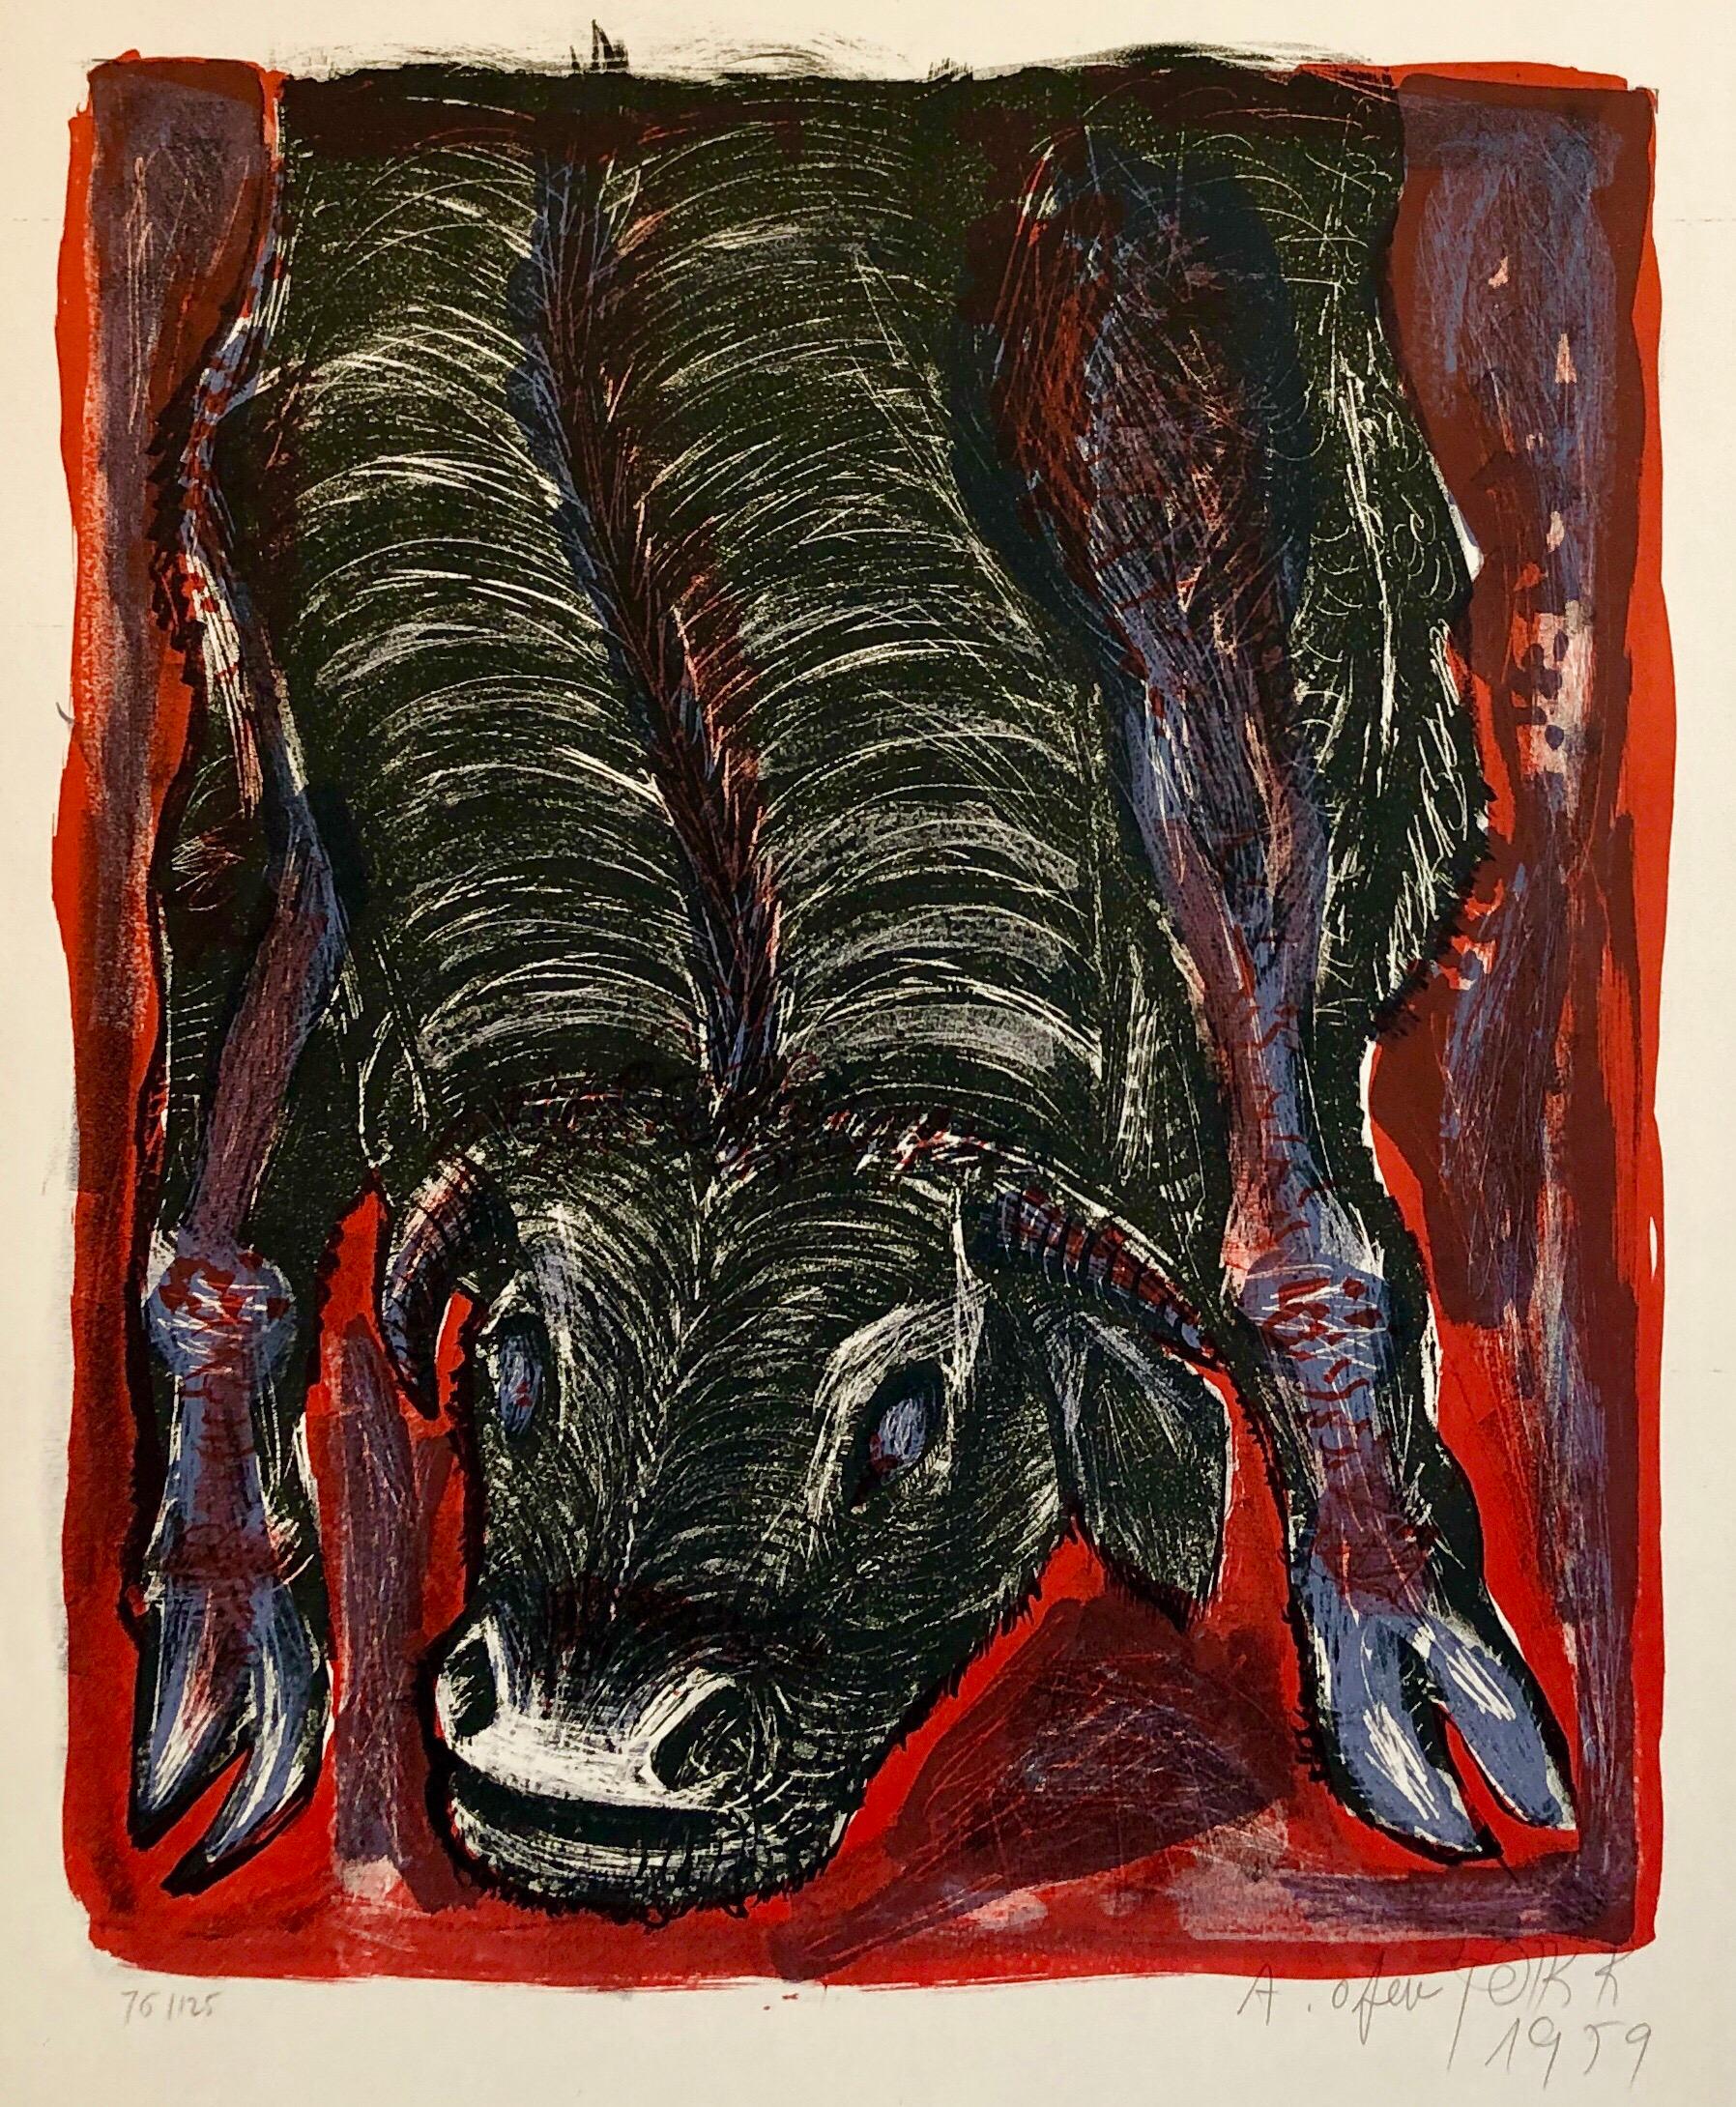 Bright, vibrant purple, red and black bull or ox. 
1959 Lithograph "Bull".
This was from a portfolio which included works by Yosl Bergner, Menashe Kadishman, Yosef Zaritsky, Aharon Kahana, Jacob Wexler, Moshe Tamir and Michael Gross.

Avraham Ofek